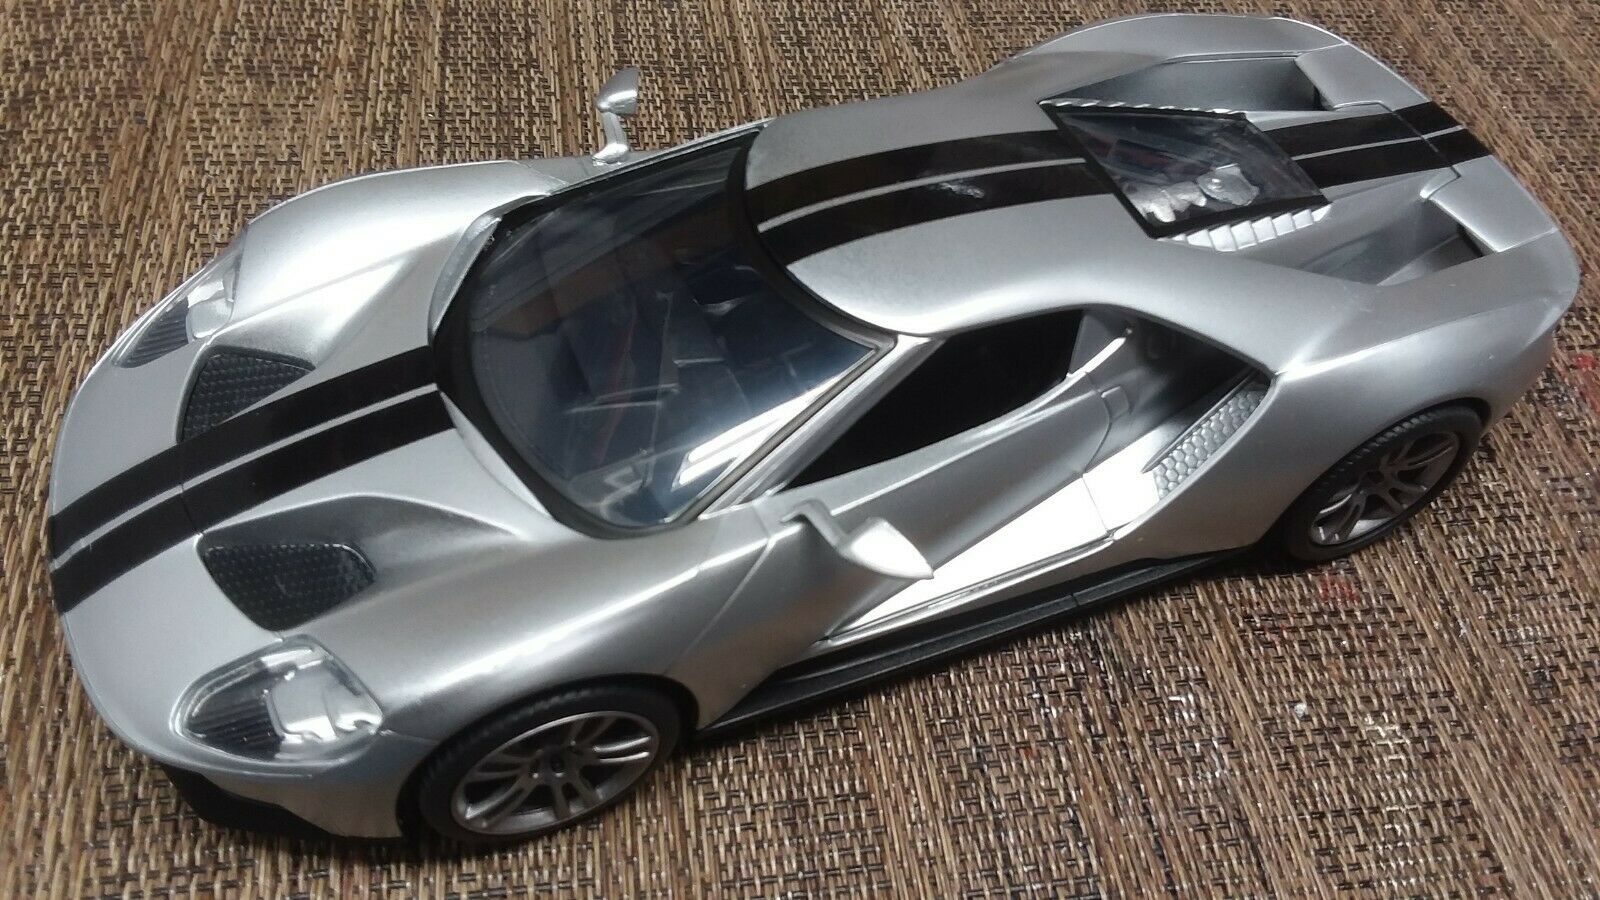 2017 Ford Gt Silver With Black Seats Revell 1/24 Scale Model Fully Assembled